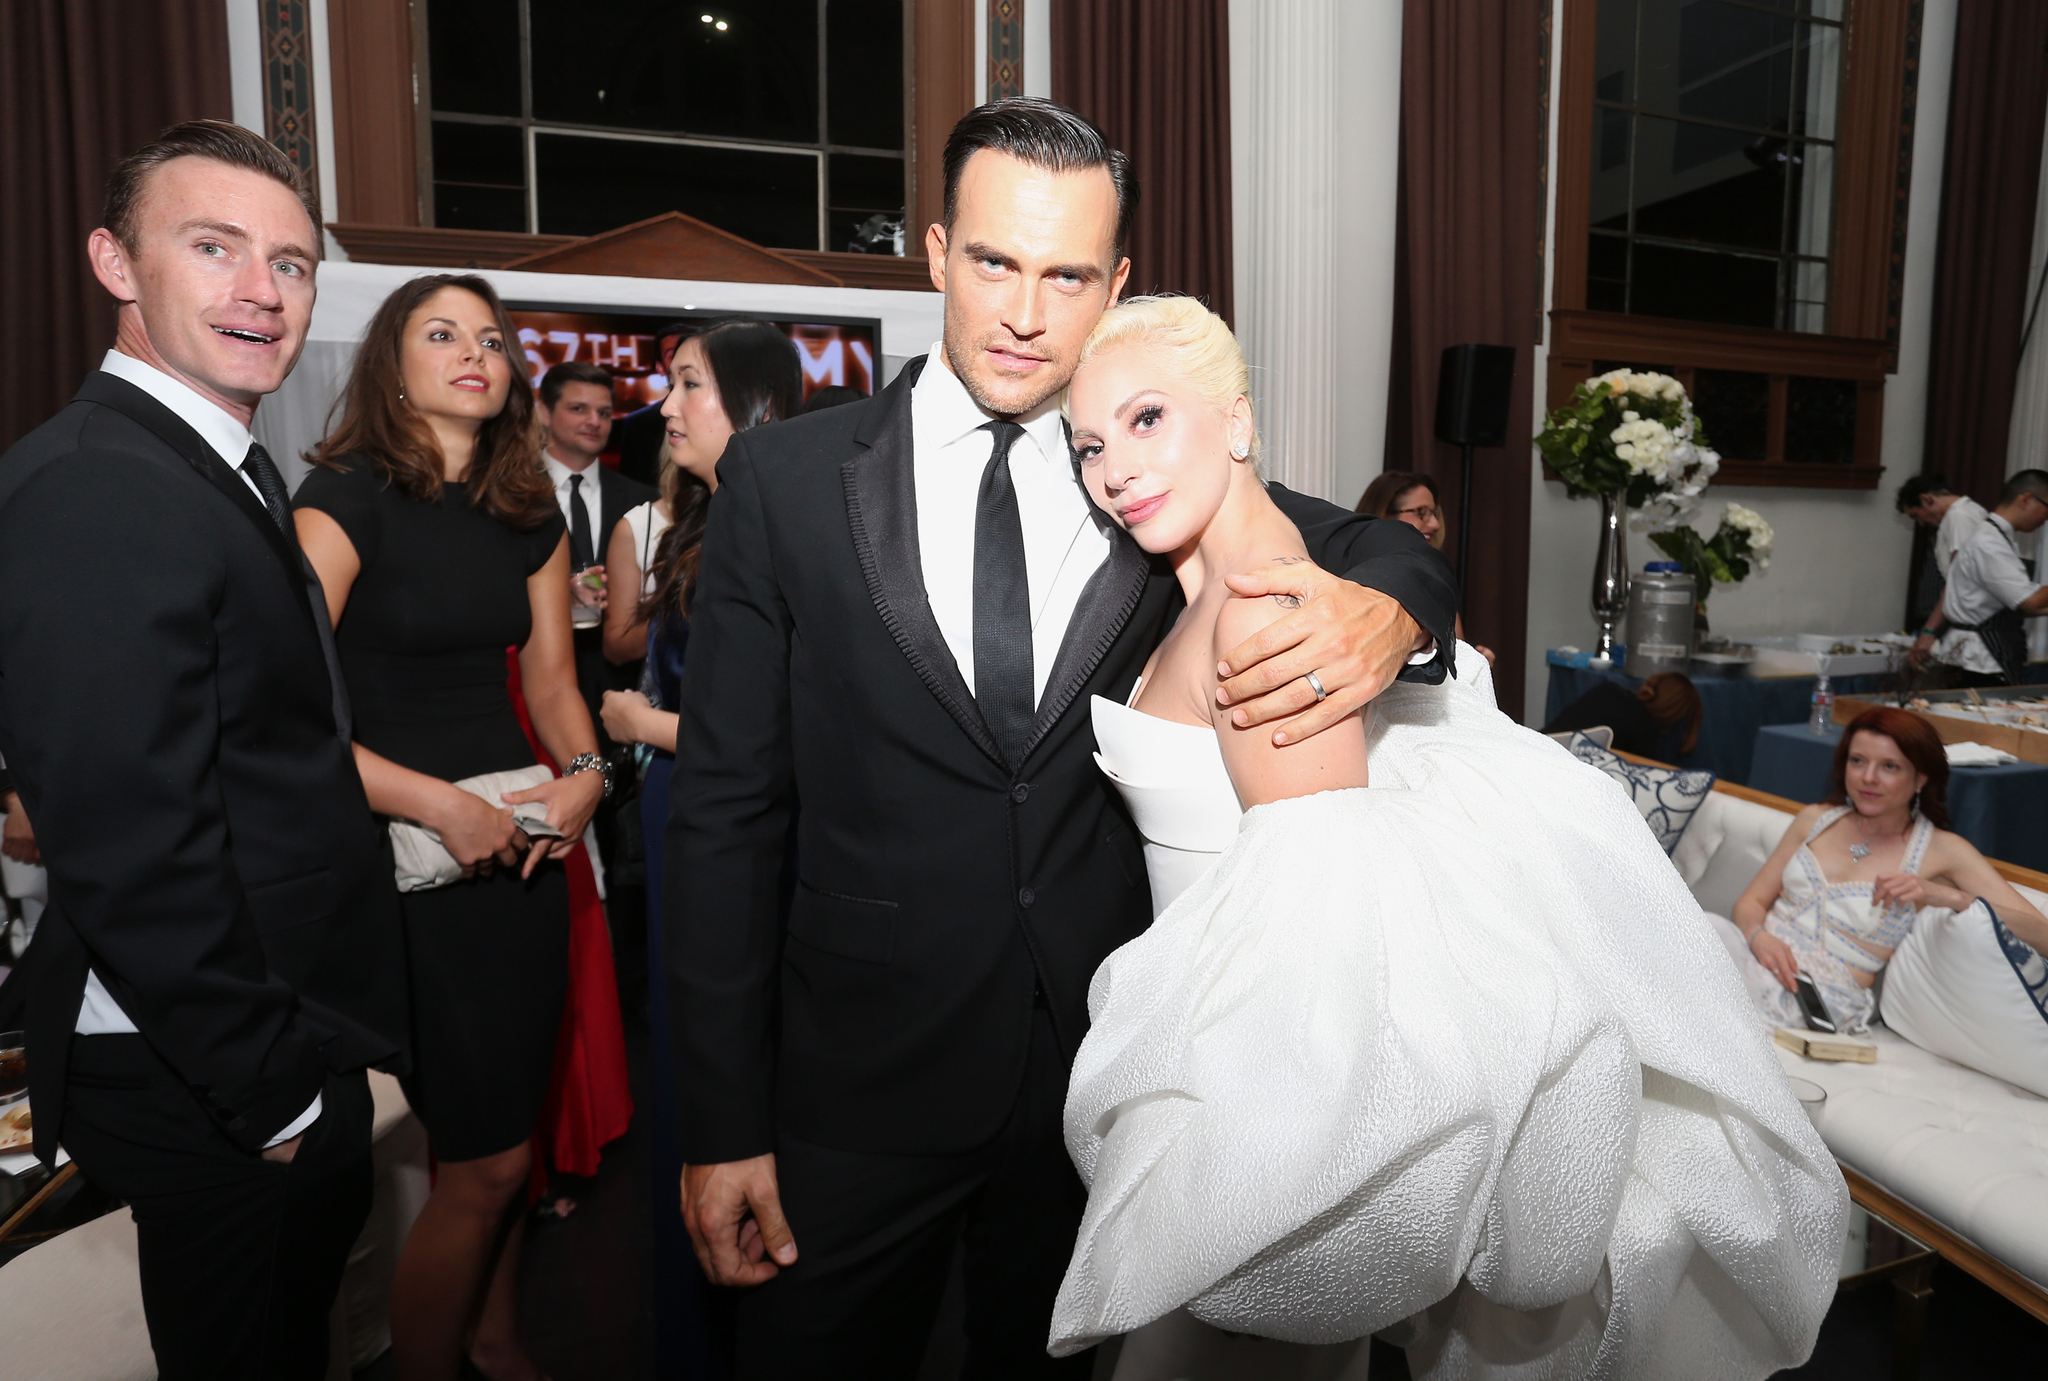 Cheyenne Jackson and Lady Gaga at event of The 67th Primetime Emmy Awards (2015)